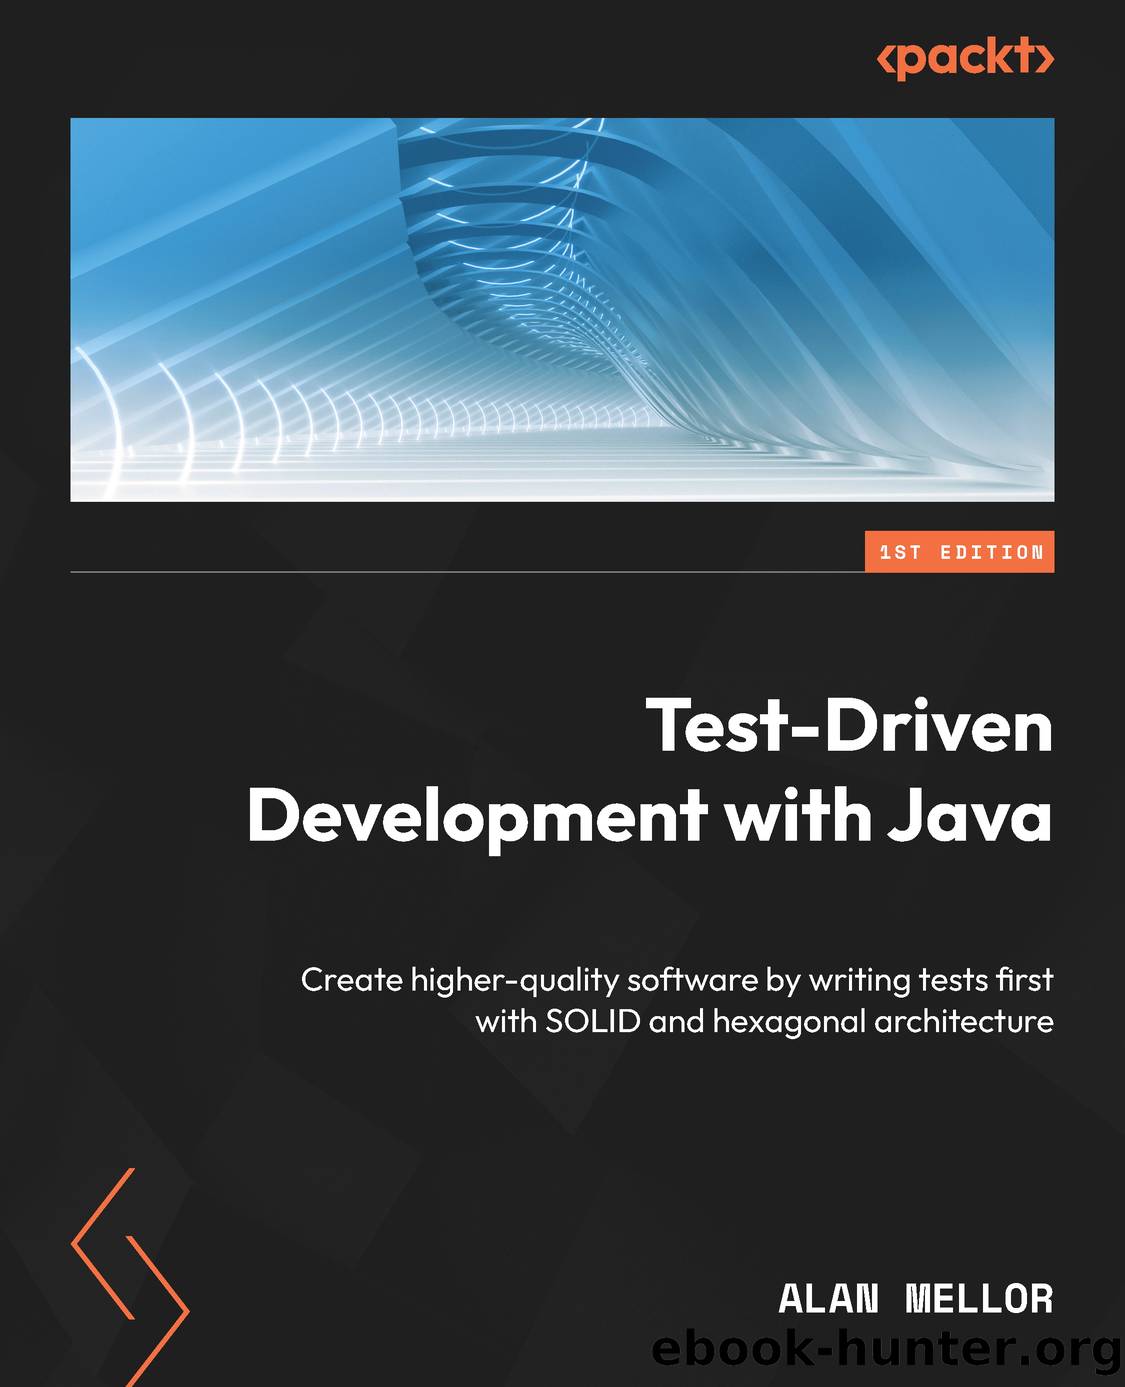 Test-Driven Development with Java by Alan Mellor